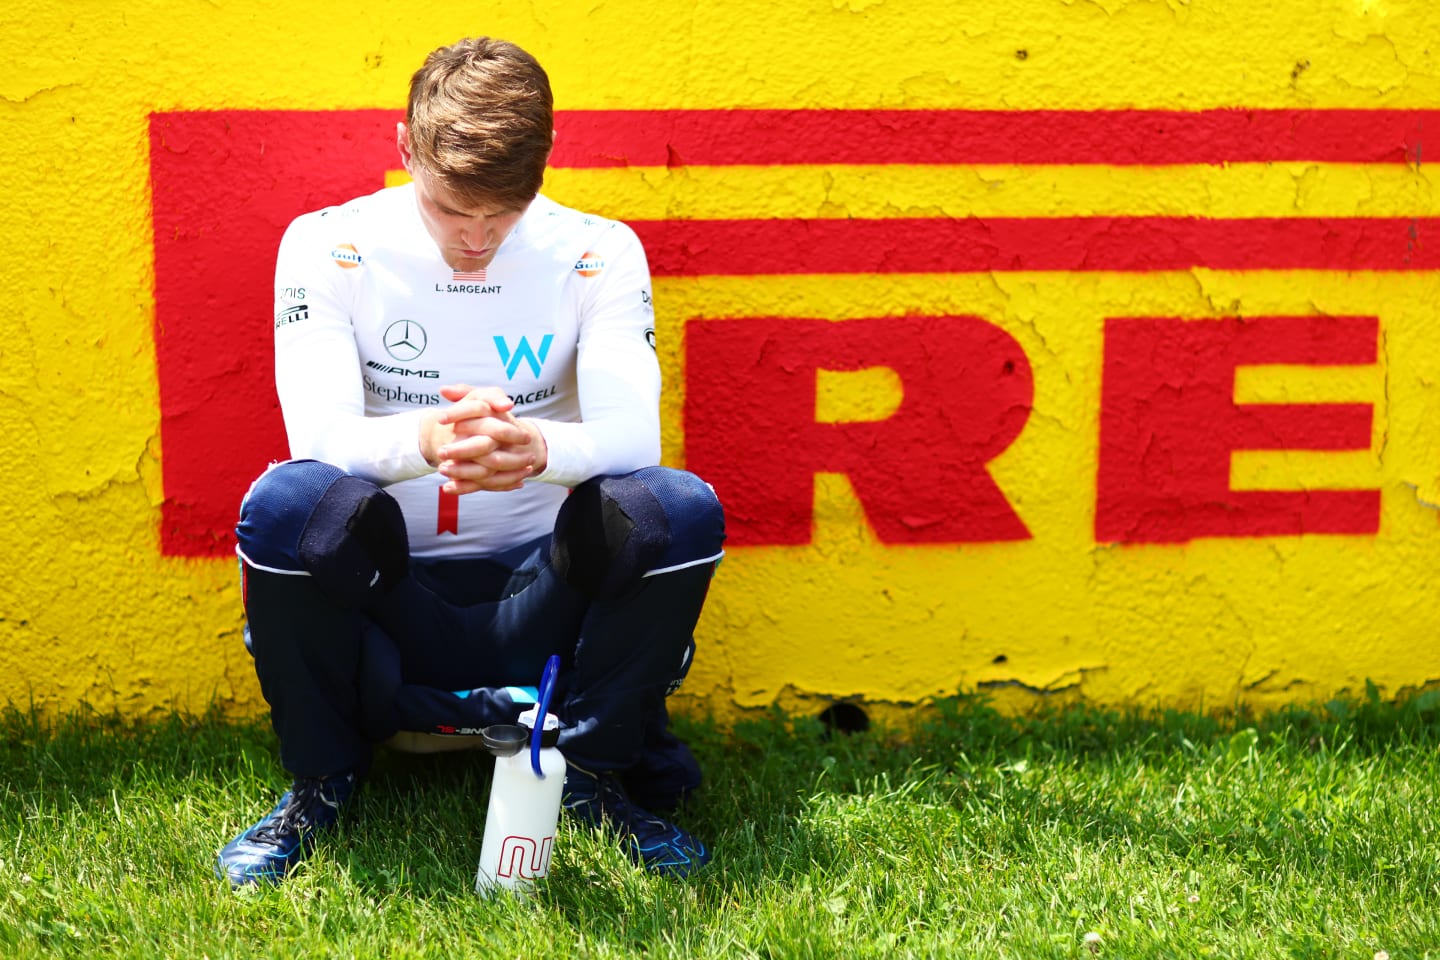 MONTREAL, QUEBEC - JUNE 18: Logan Sargeant of United States and Williams looks on, on the grid during the F1 Grand Prix of Canada at Circuit Gilles Villeneuve on June 18, 2023 in Montreal, Quebec. (Photo by Dan Istitene - Formula 1/Formula 1 via Getty Images)